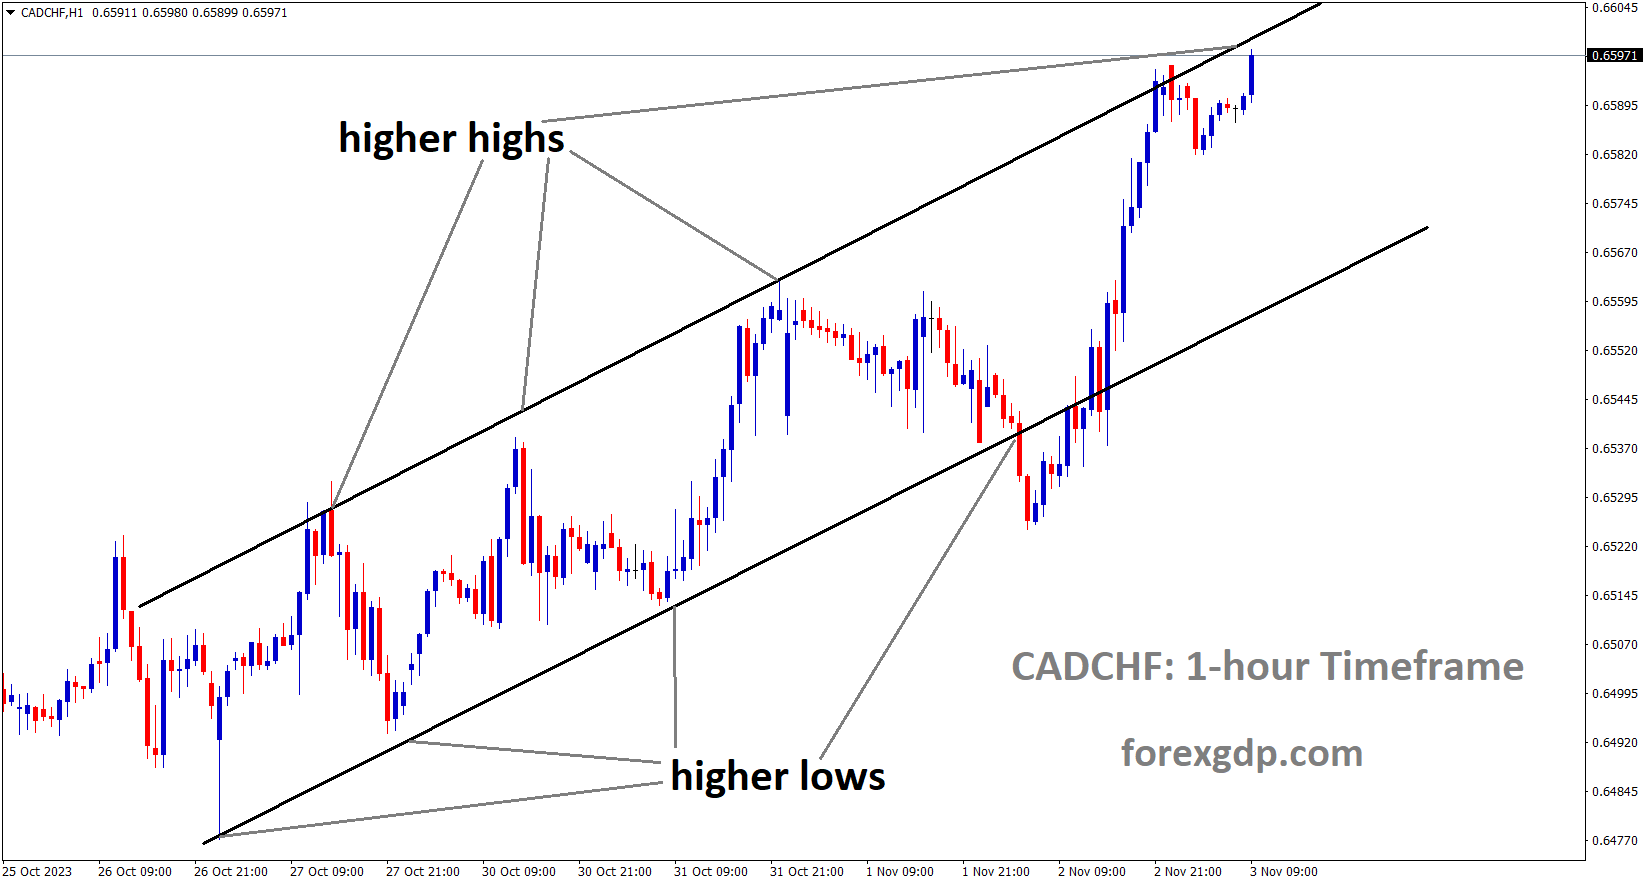 CADCHF is moving in an ascending channel and the market has reached the higher high area of the channel